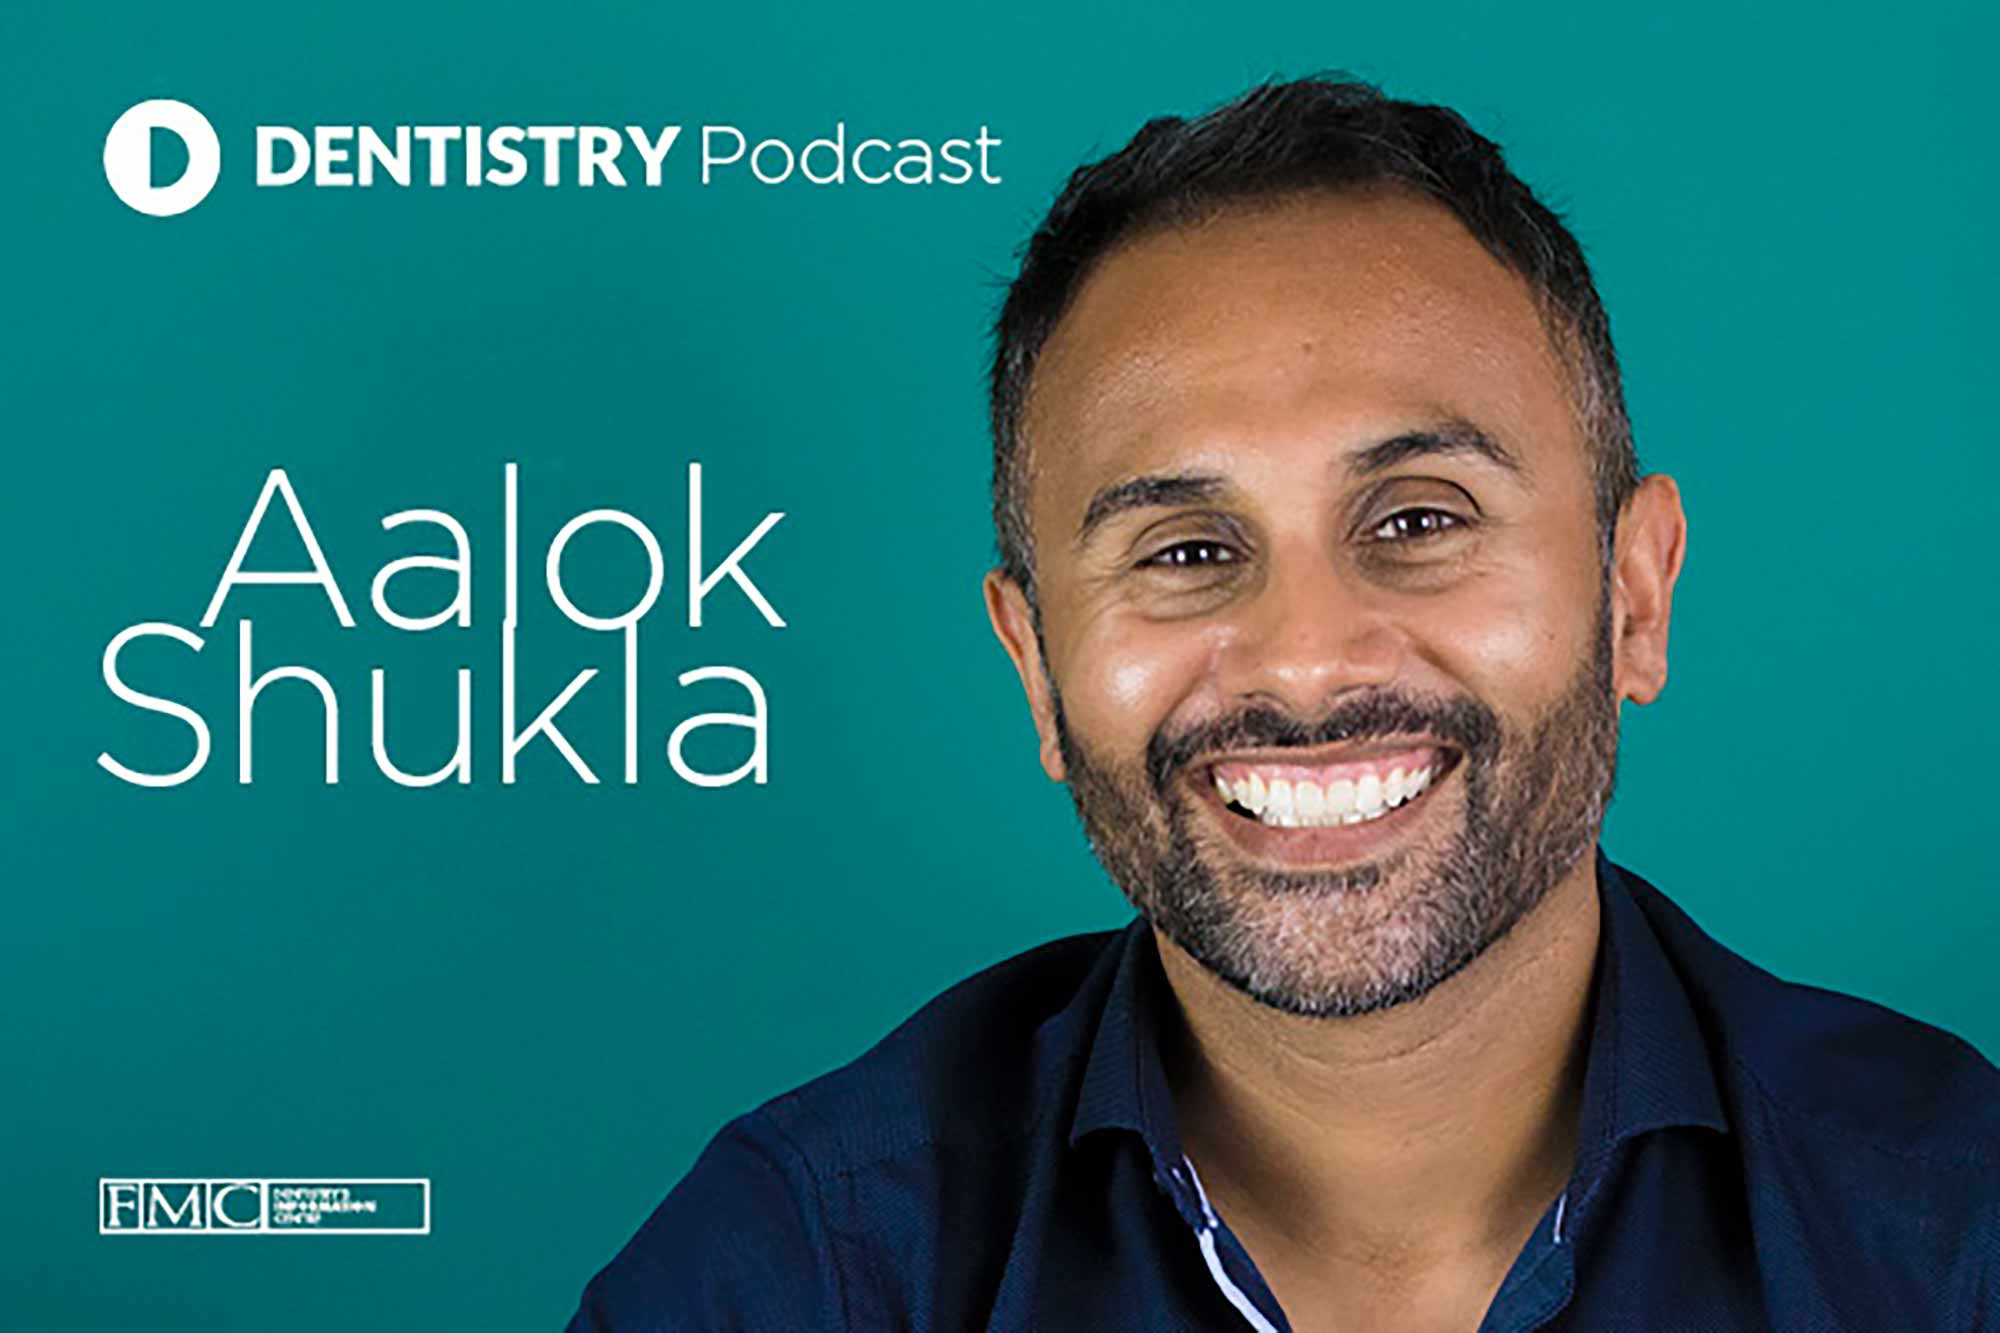 Aalok Shukla speaks about the ins and outs of teledentistry and why he thinks it enhances business in Dentistry Online's latest podcast